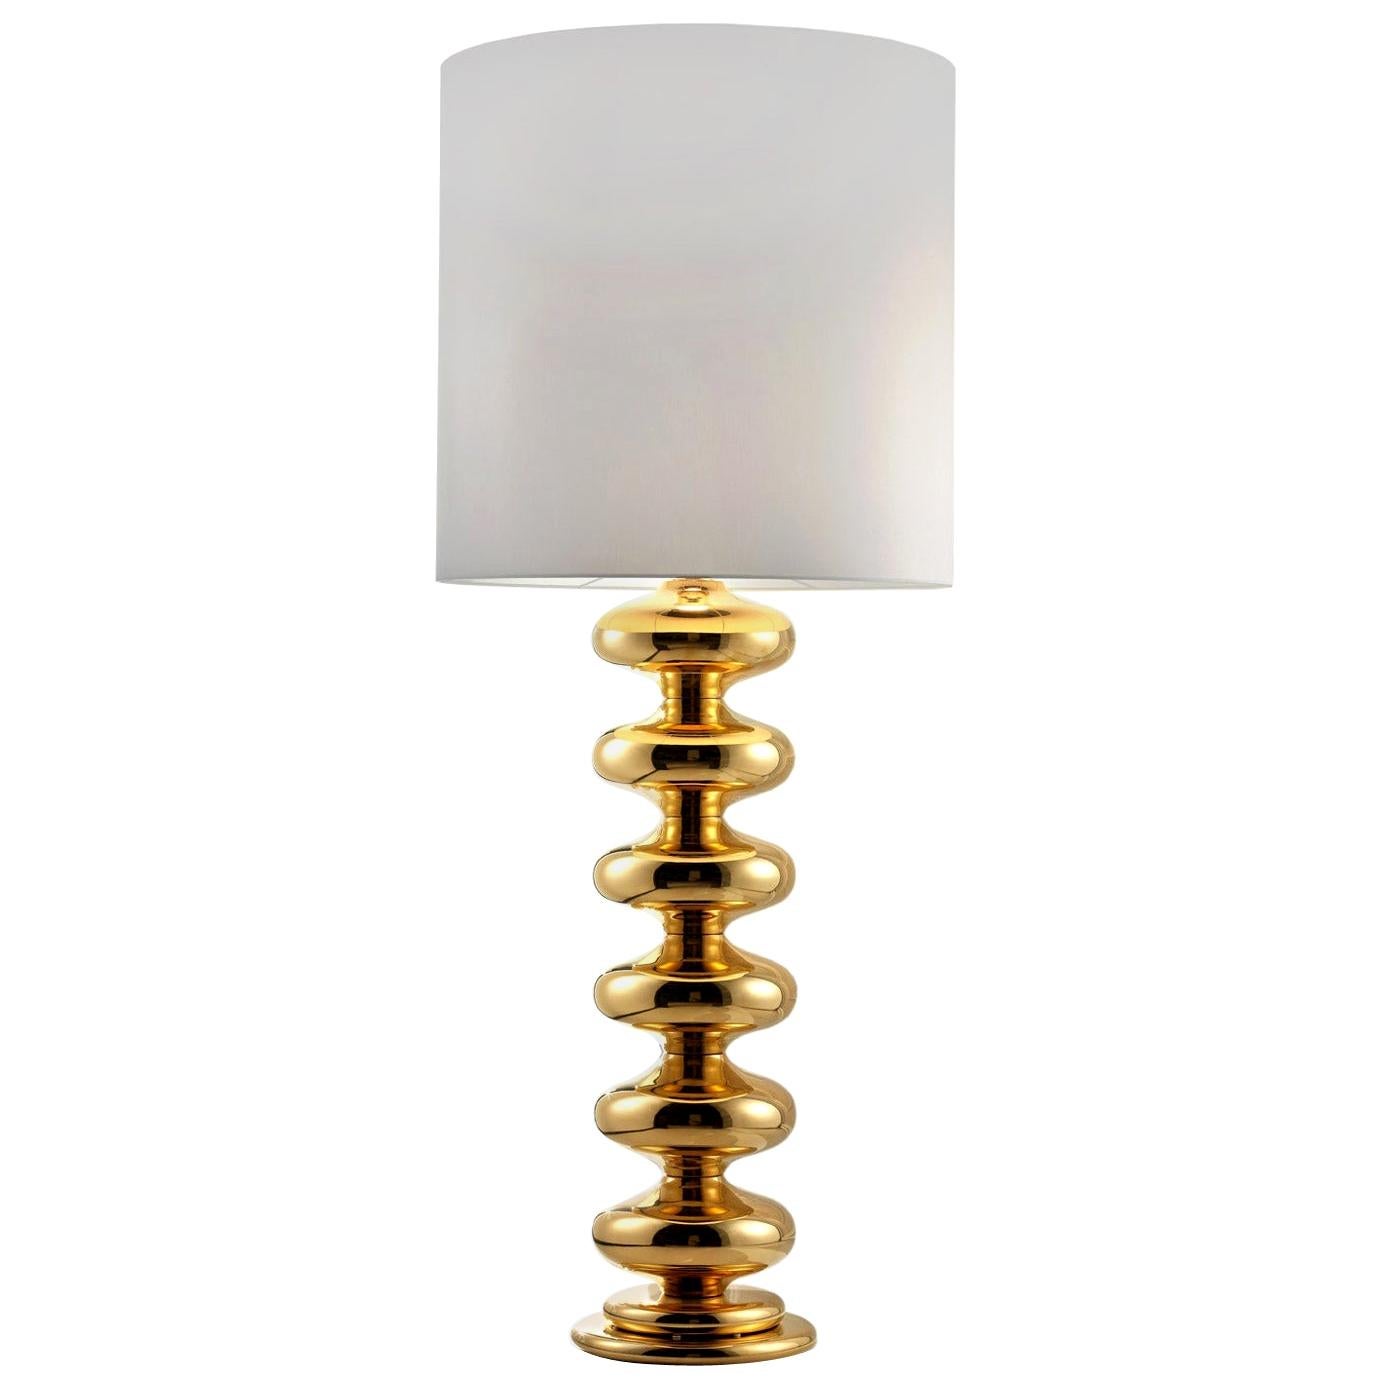 Ceramic Lamp "NIVES3" Handcrafted in 24-Karat Gold by Gabriella B. Made in Italy For Sale